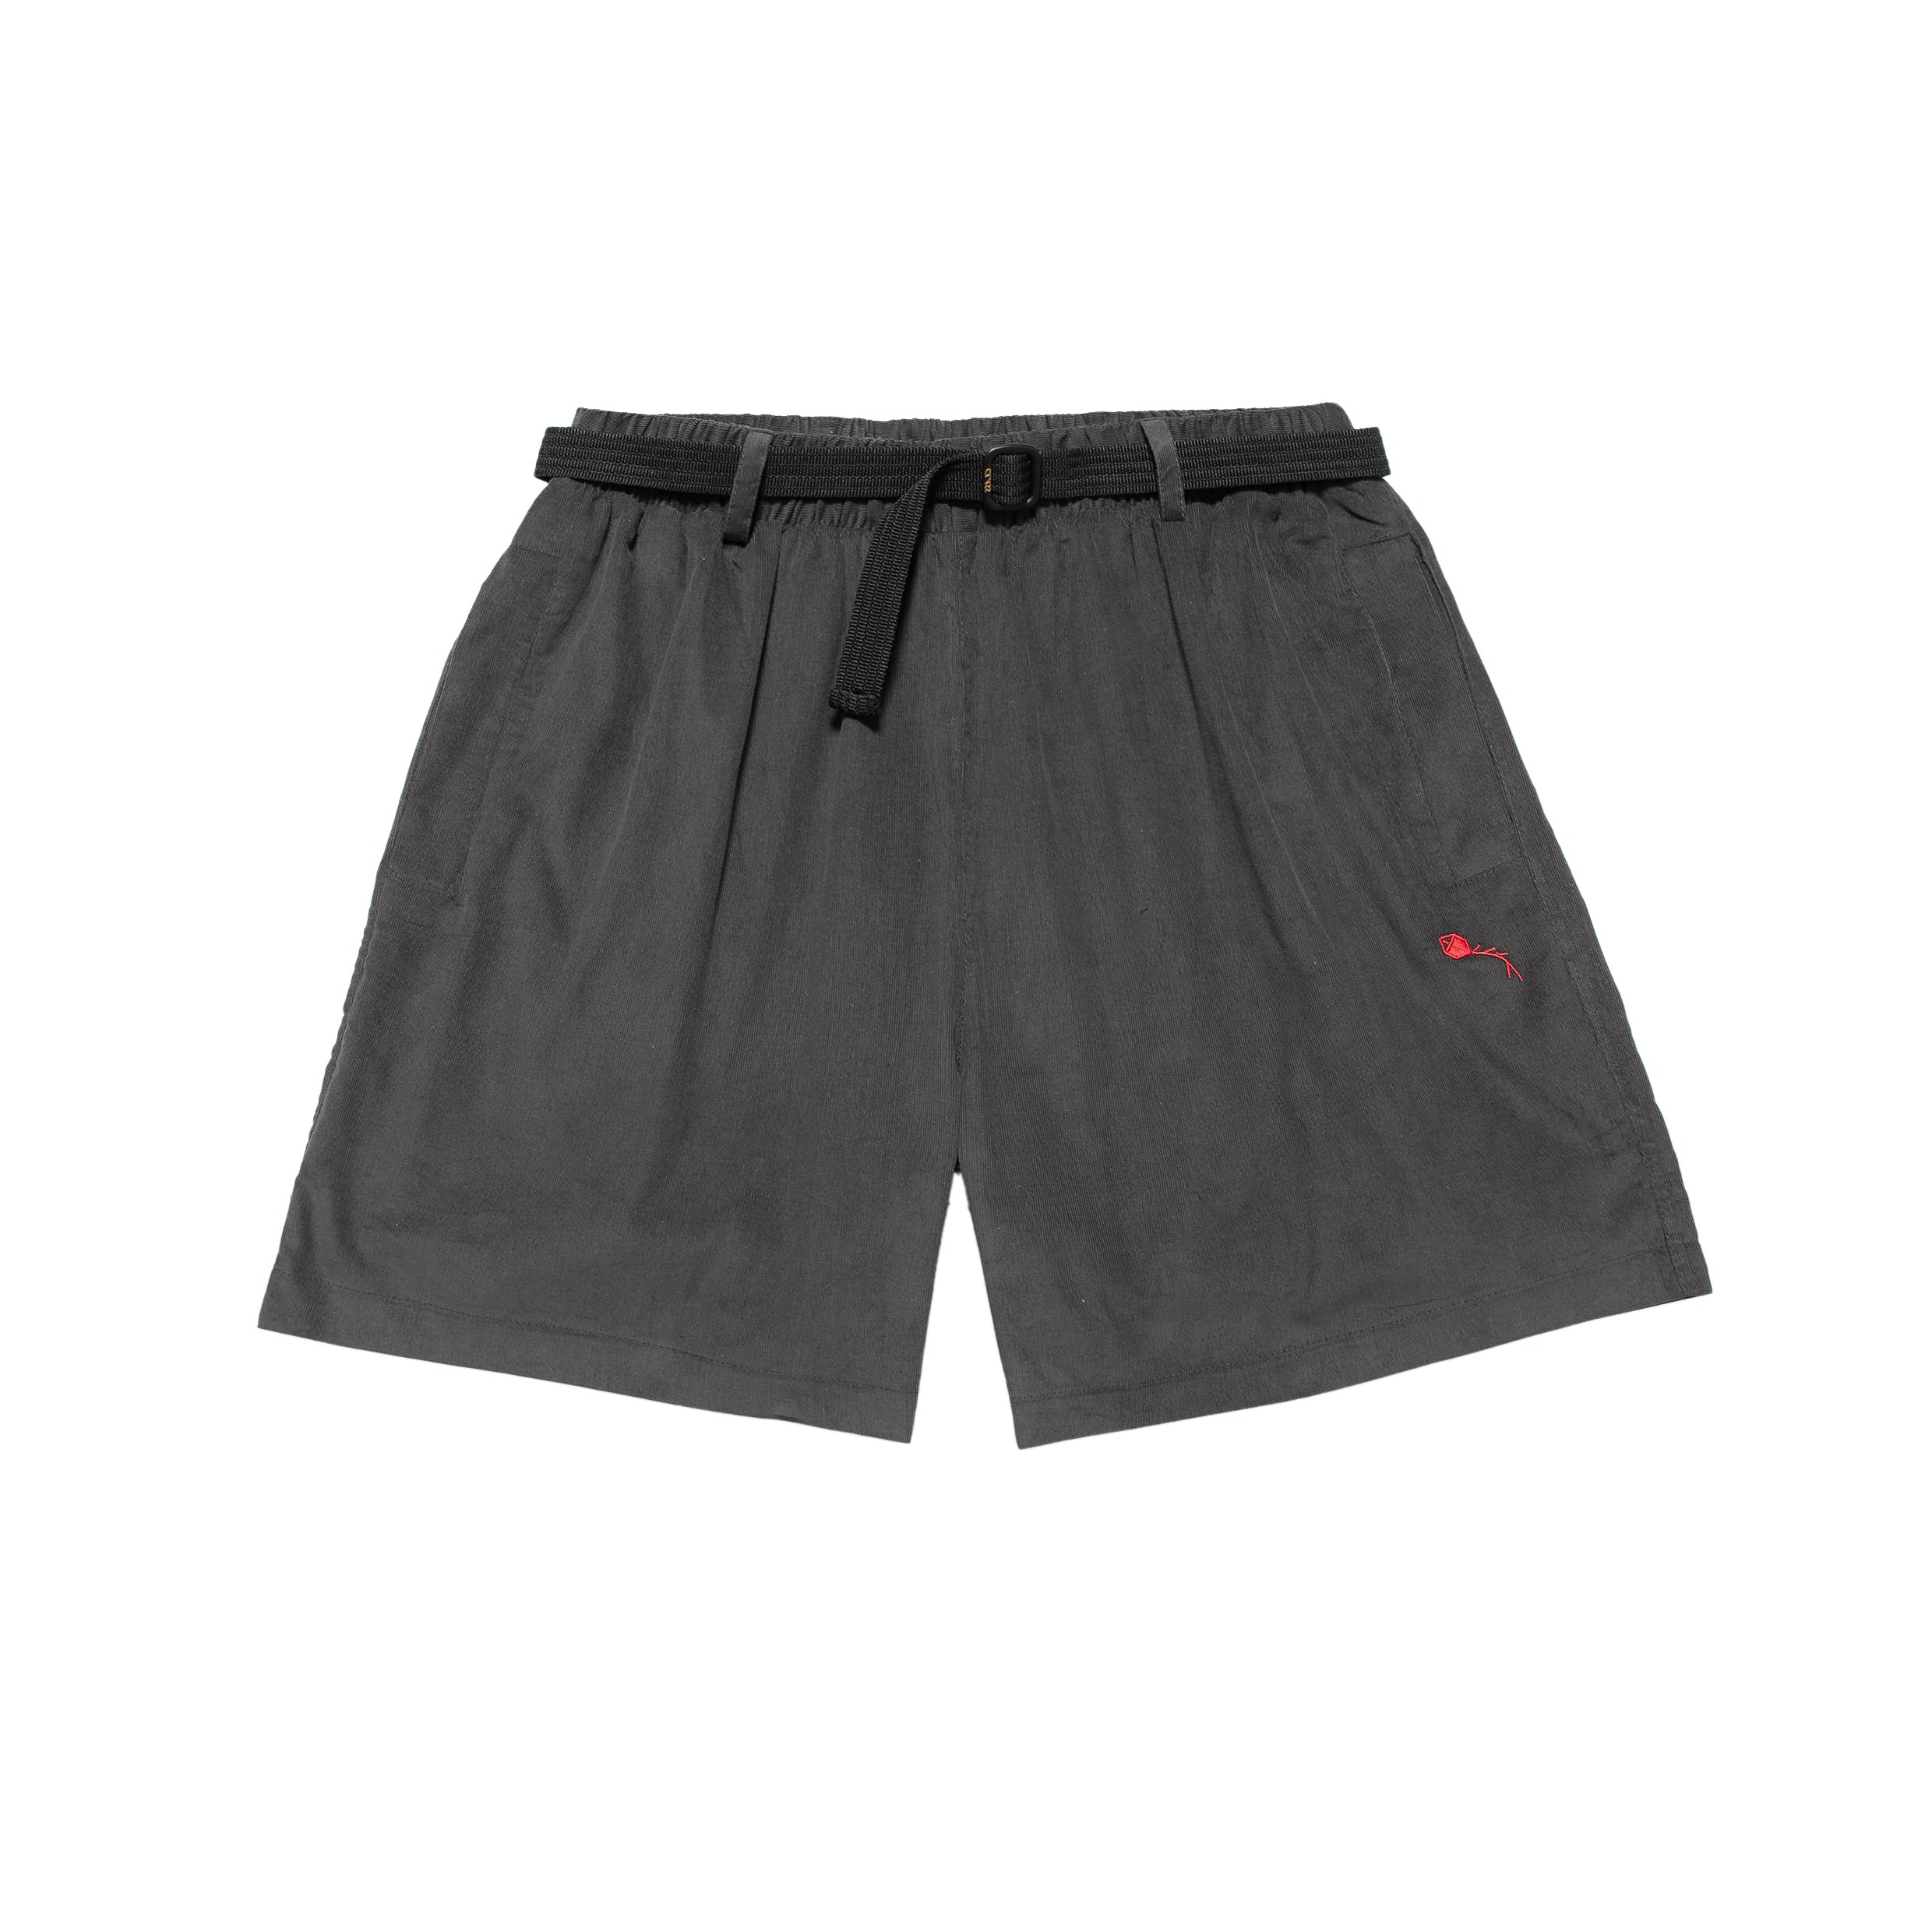 CLASS - Shorts Pipa Corduroy "Lead" - THE GAME